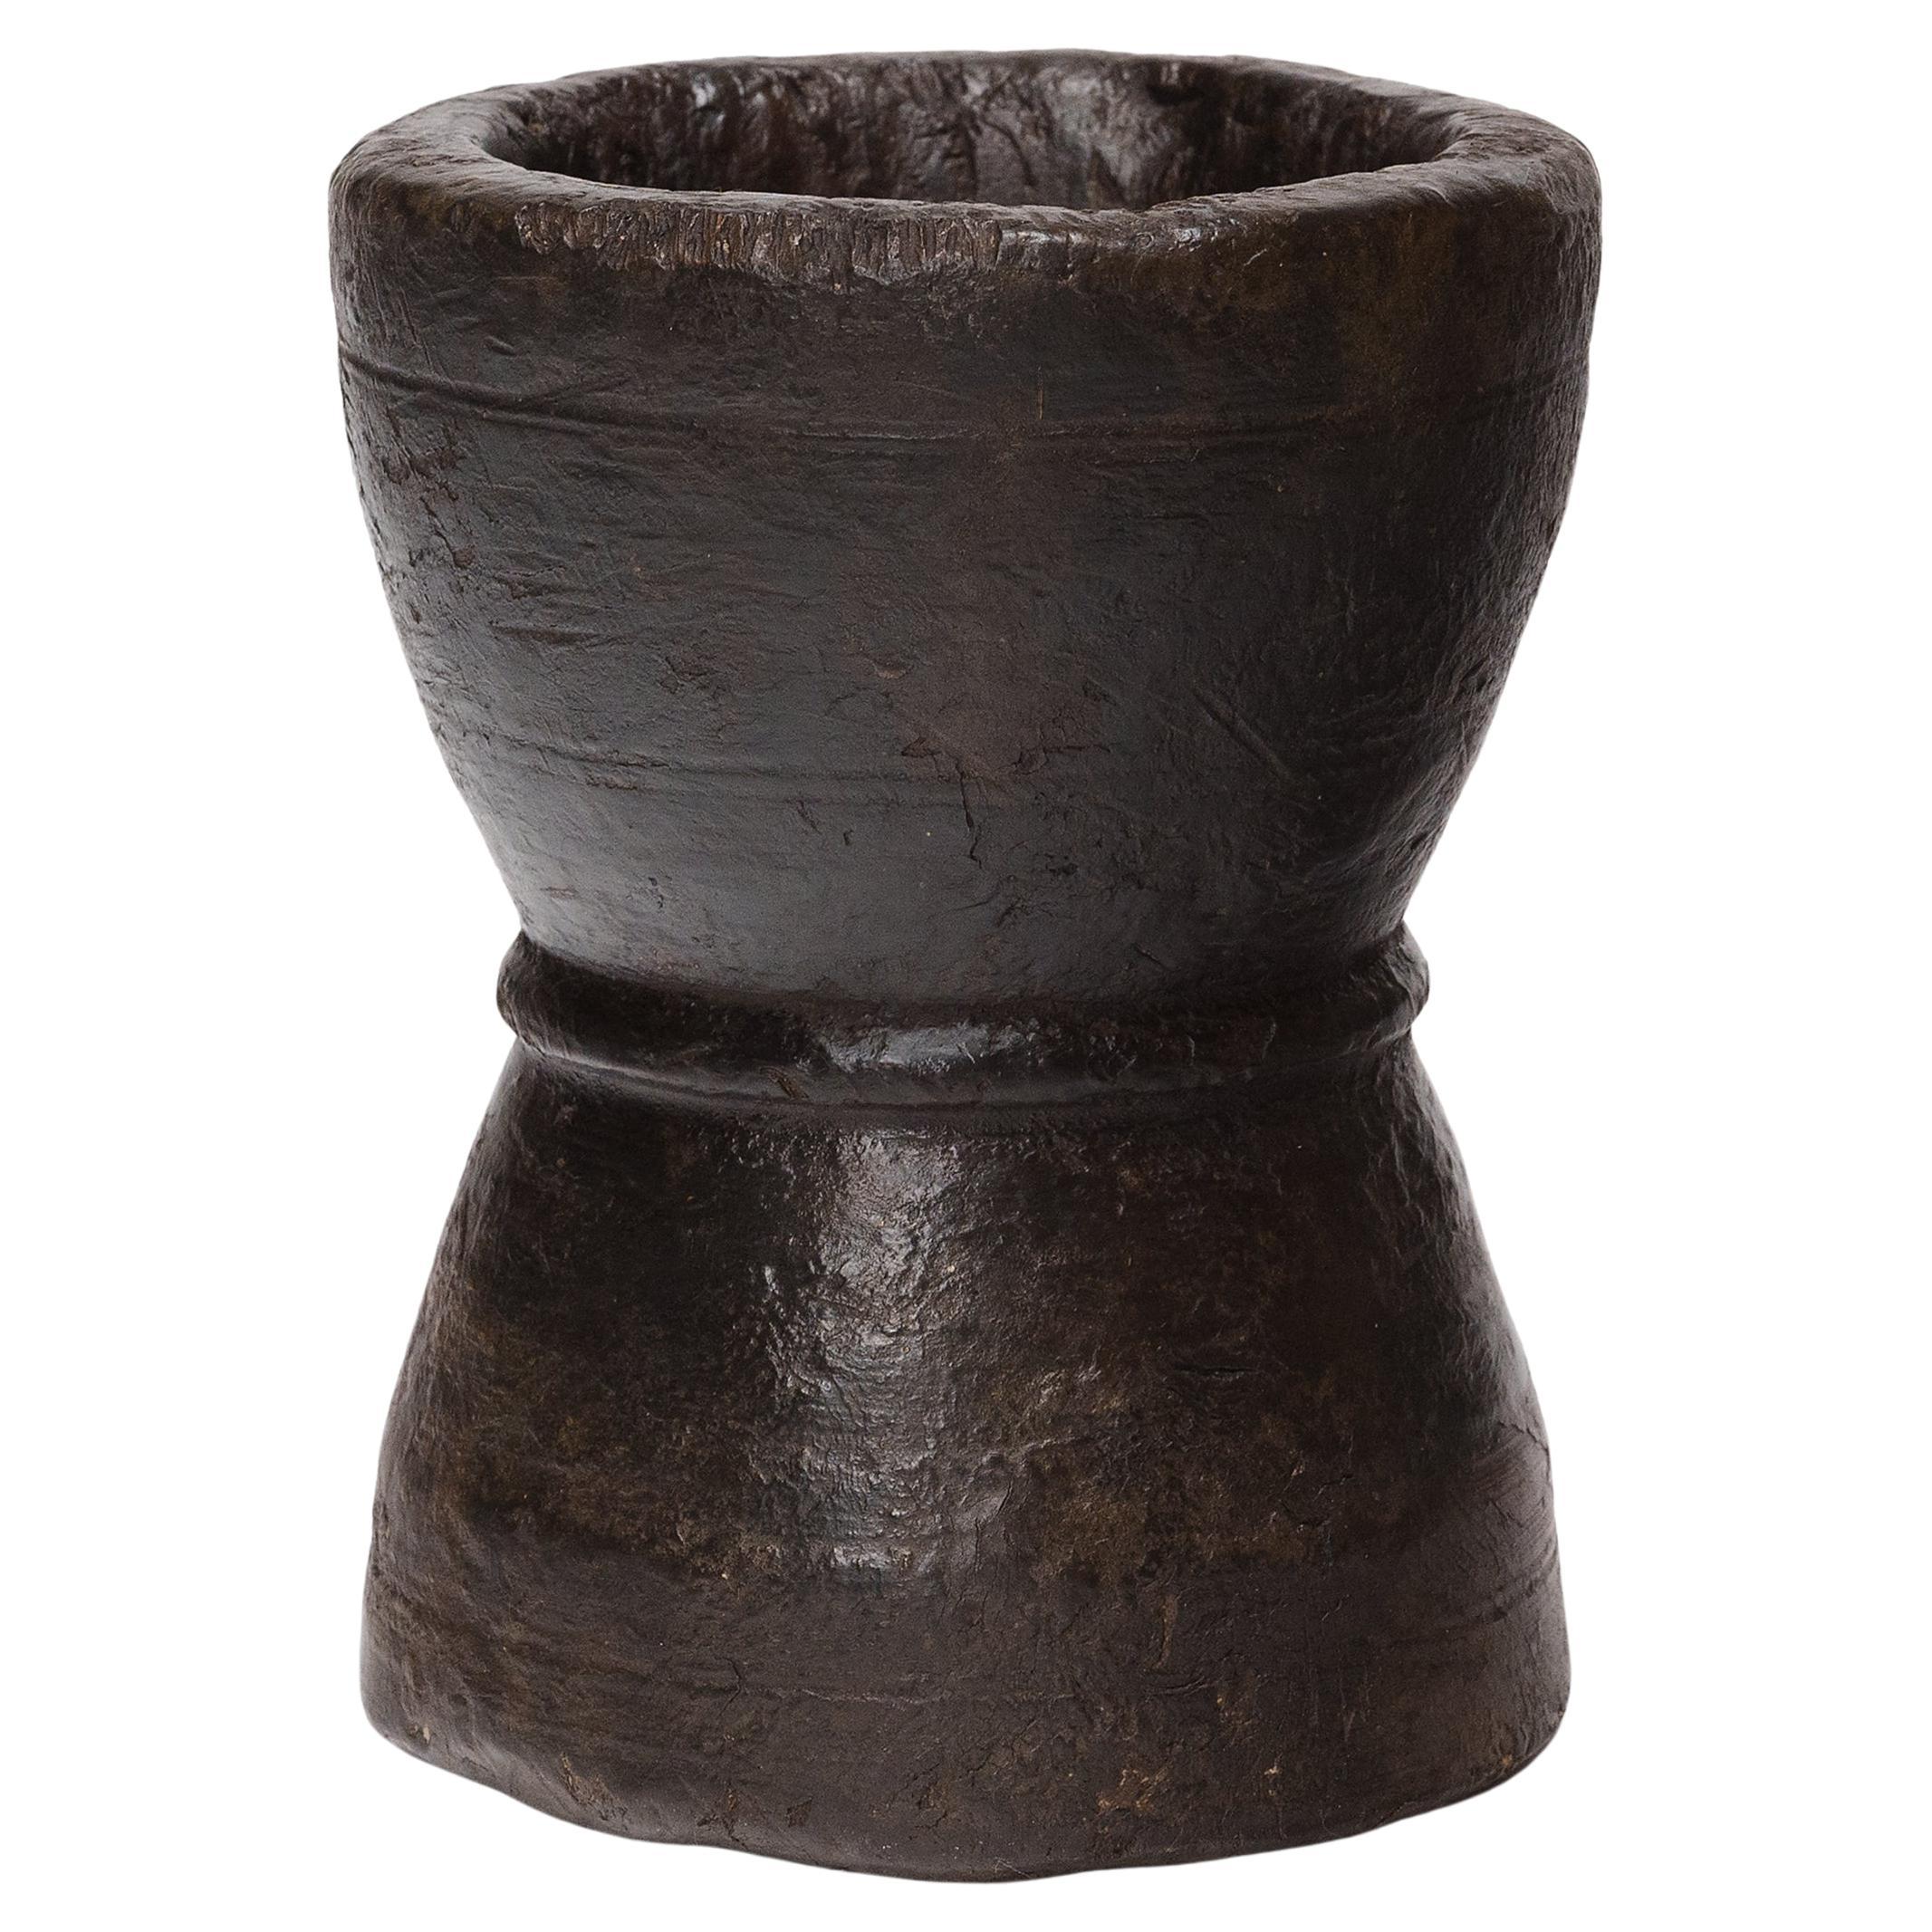 Chinese Turned Wooden Mortar, c. 1900